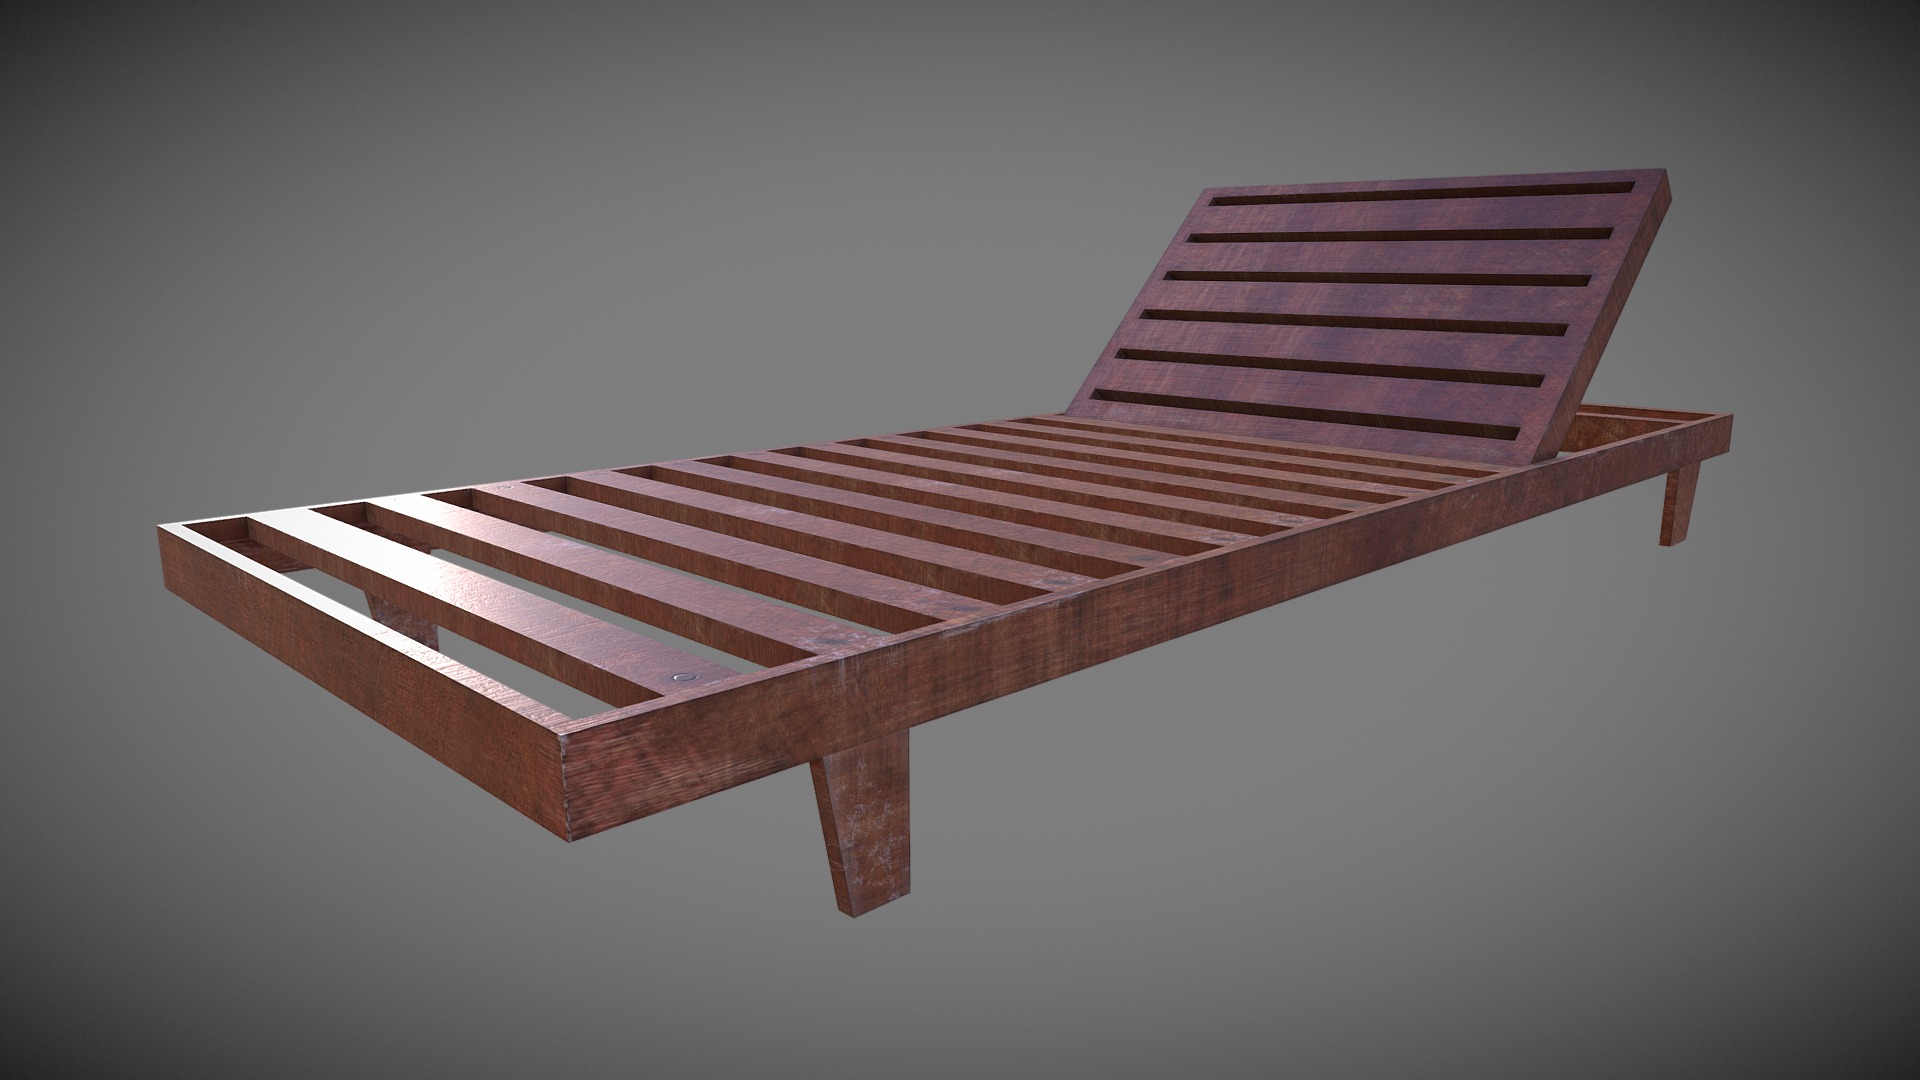 3D model VIP hammock - This is a 3D model of the VIP hammock. The 3D model is about a wooden bench with a cushion.